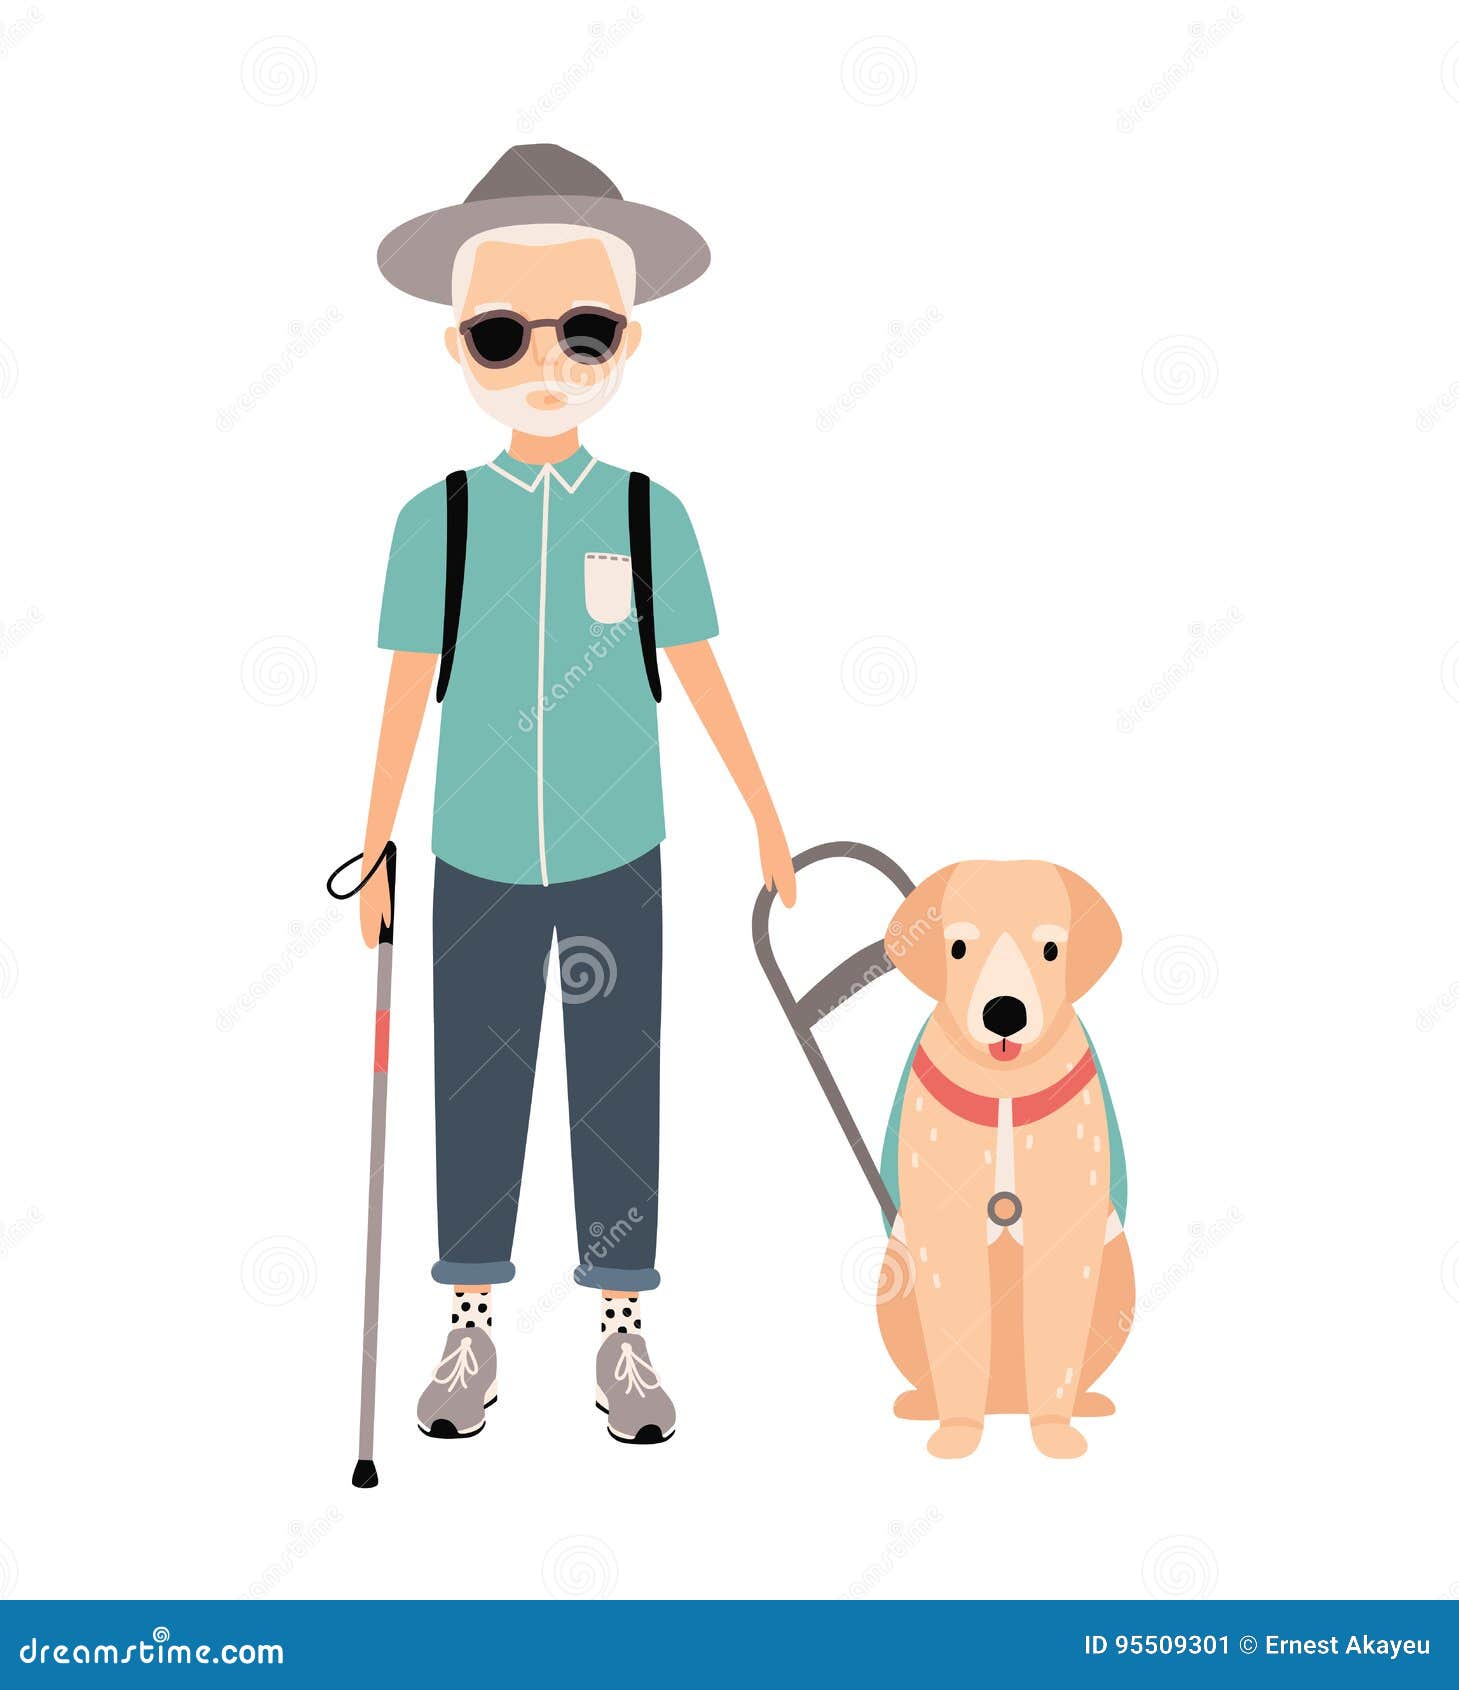 blind man. colorful image featuring visually impaired elderly with guide dog on white background. flat  cartoon